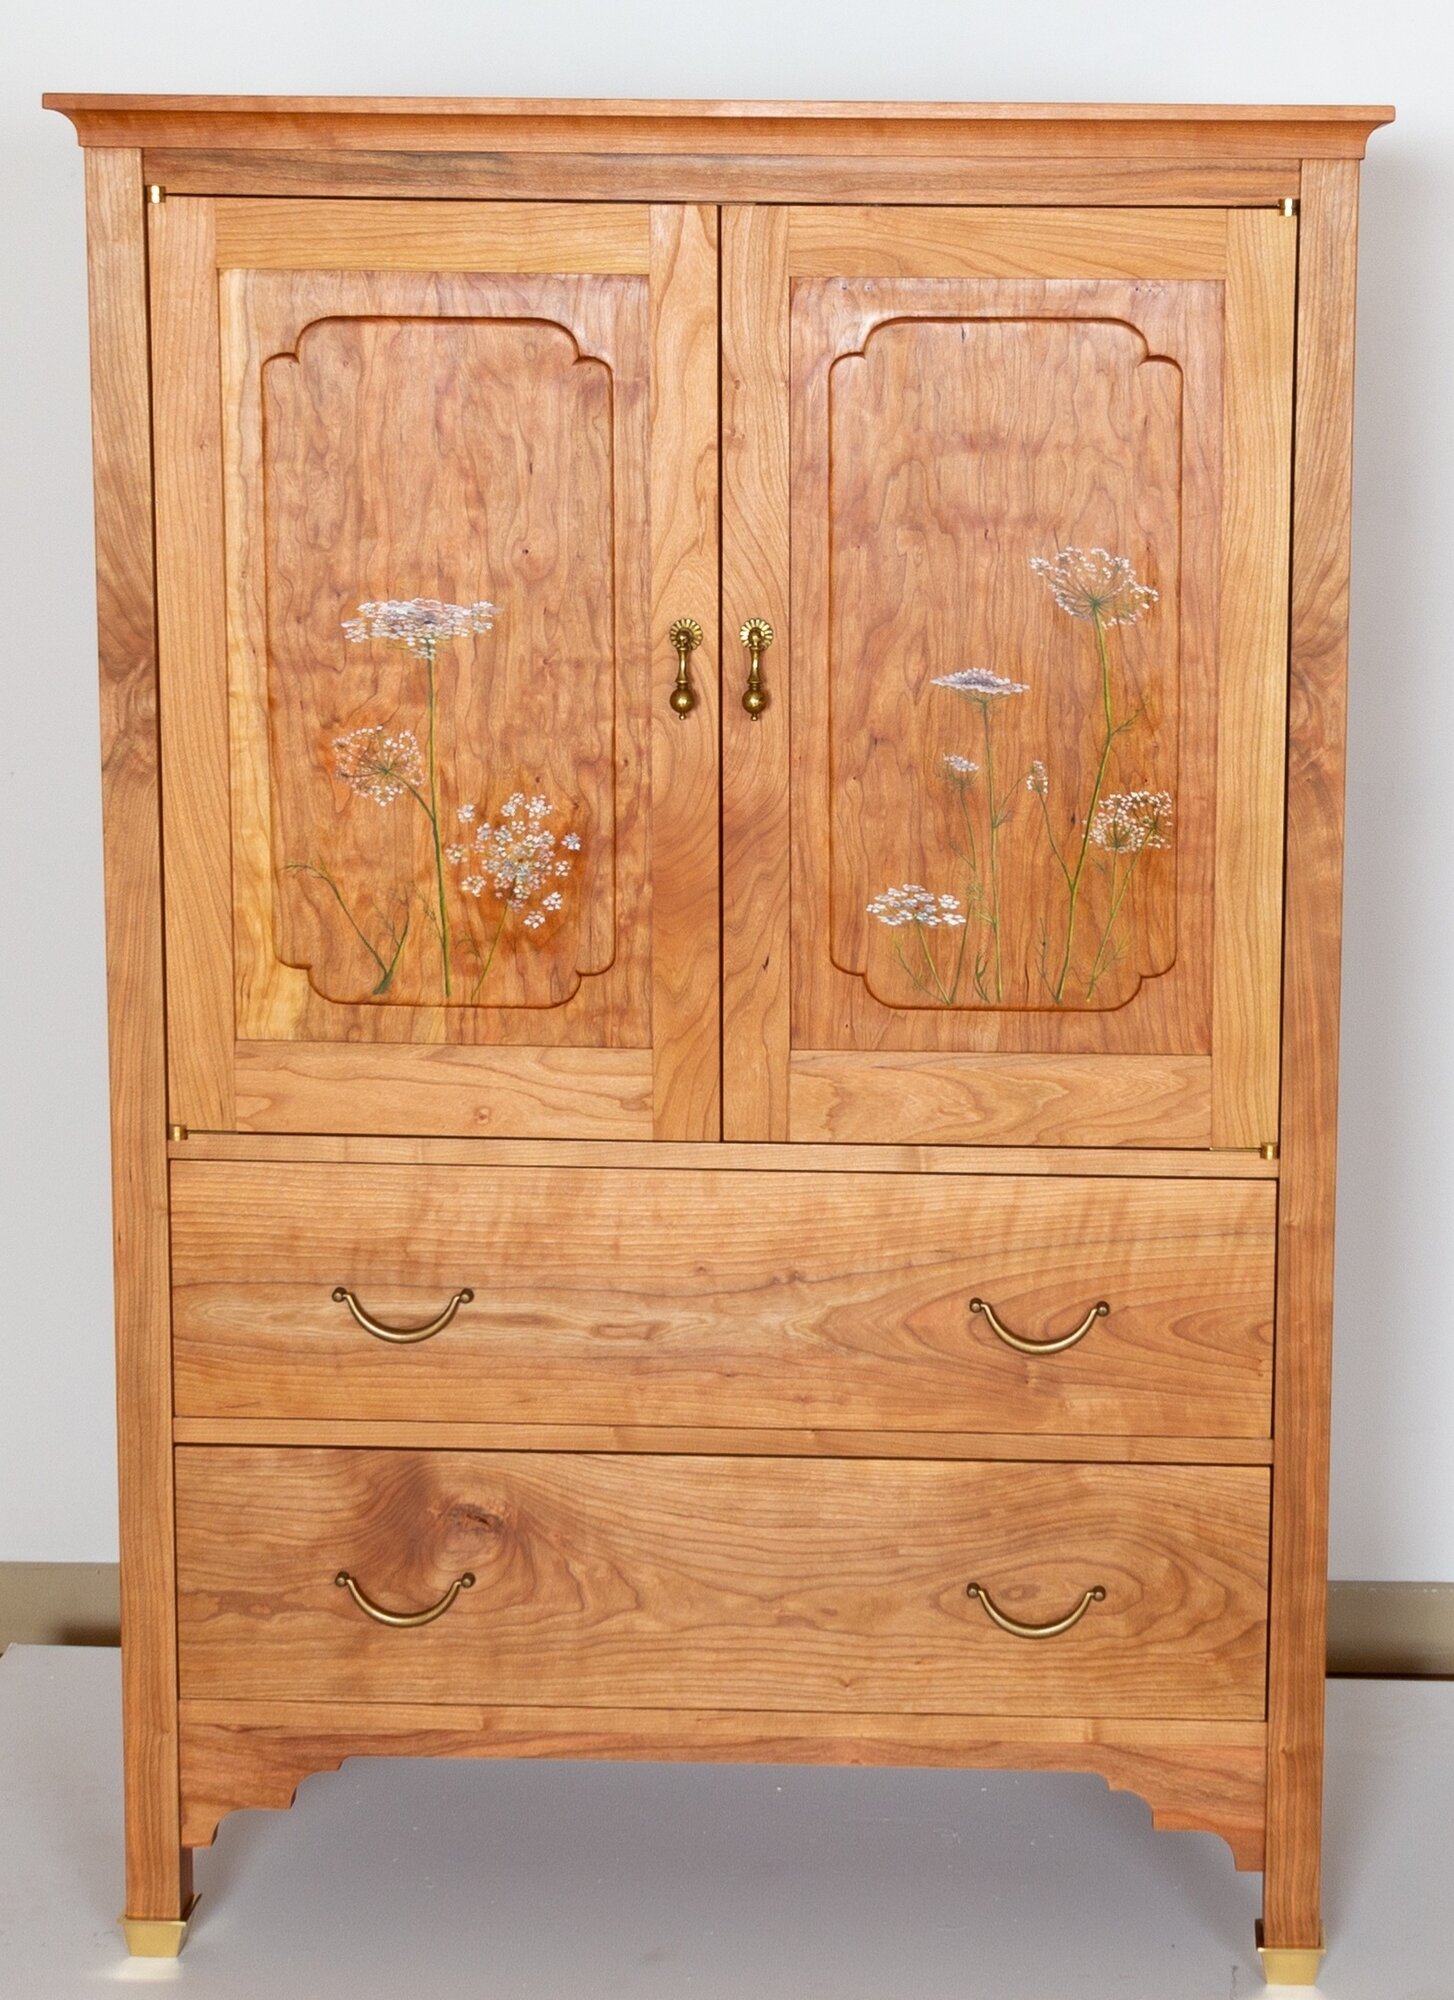 Midwife's Chest of Drawers Front View Doors Closed